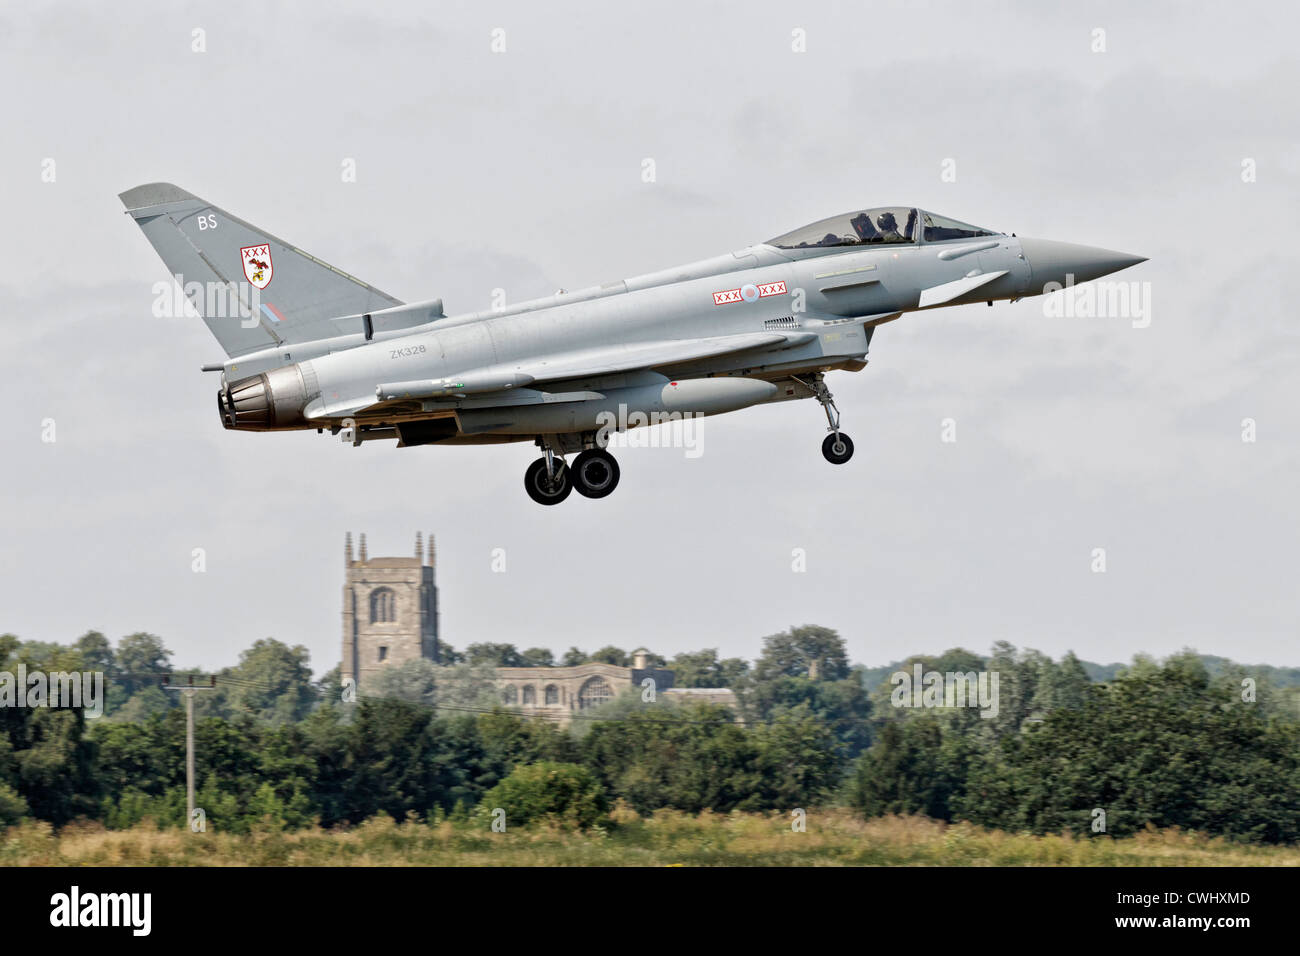 Bae systems Typhoon FGR4 on final approach to RAF Coningsby Stock Photo